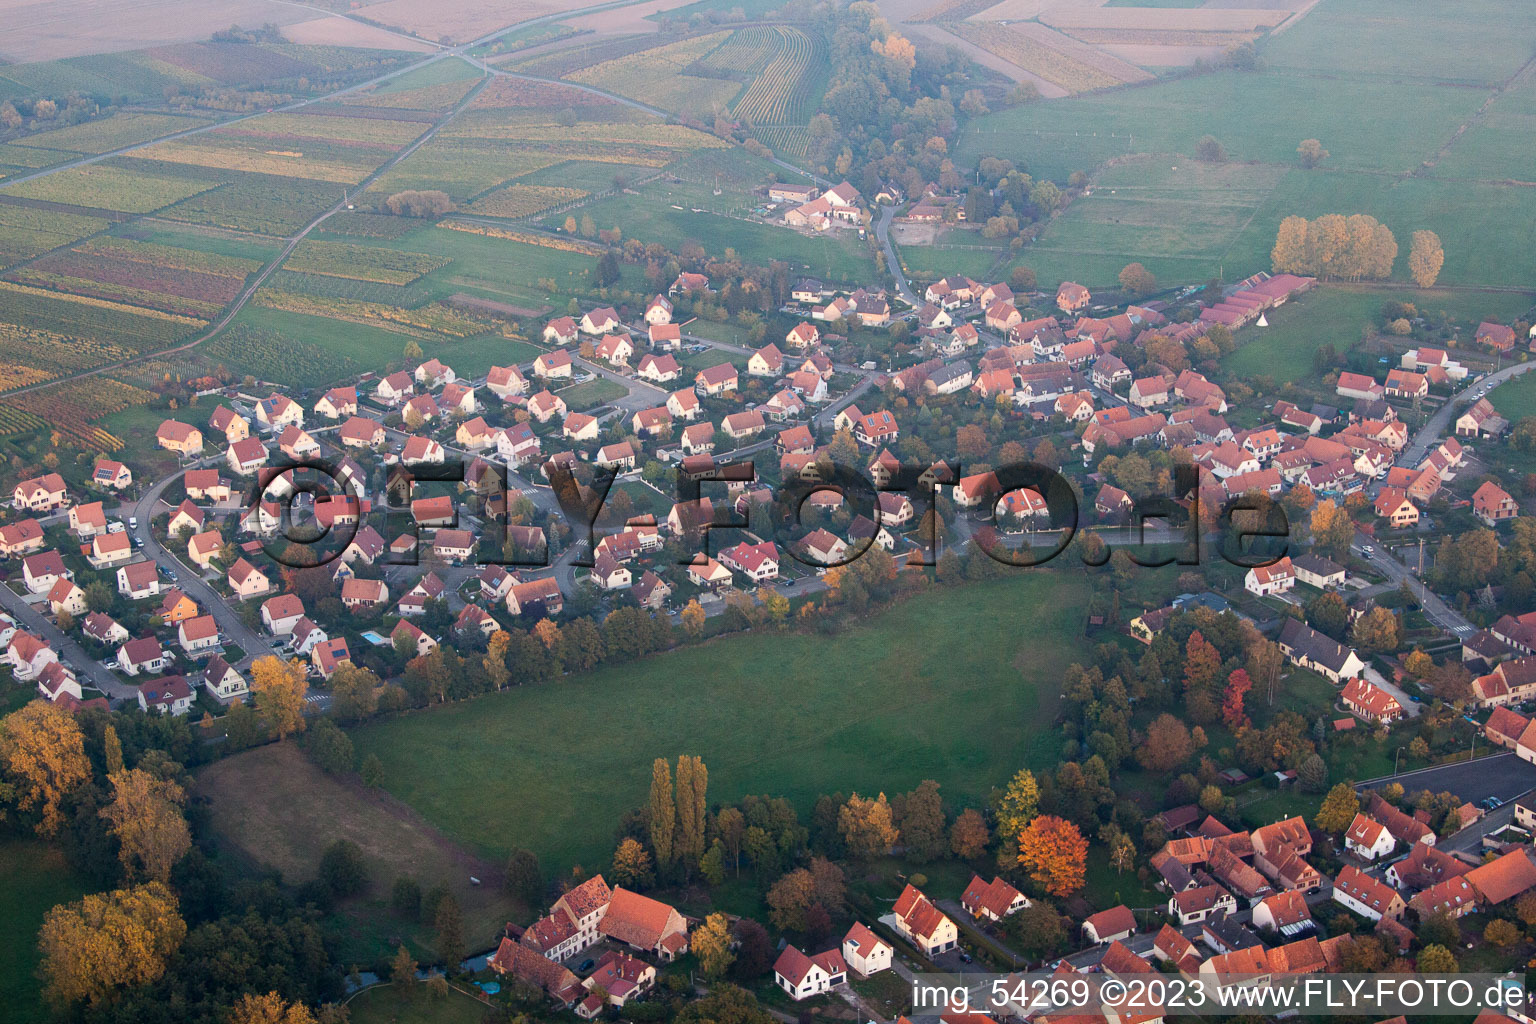 Altenstadt in the state Bas-Rhin, France seen from above